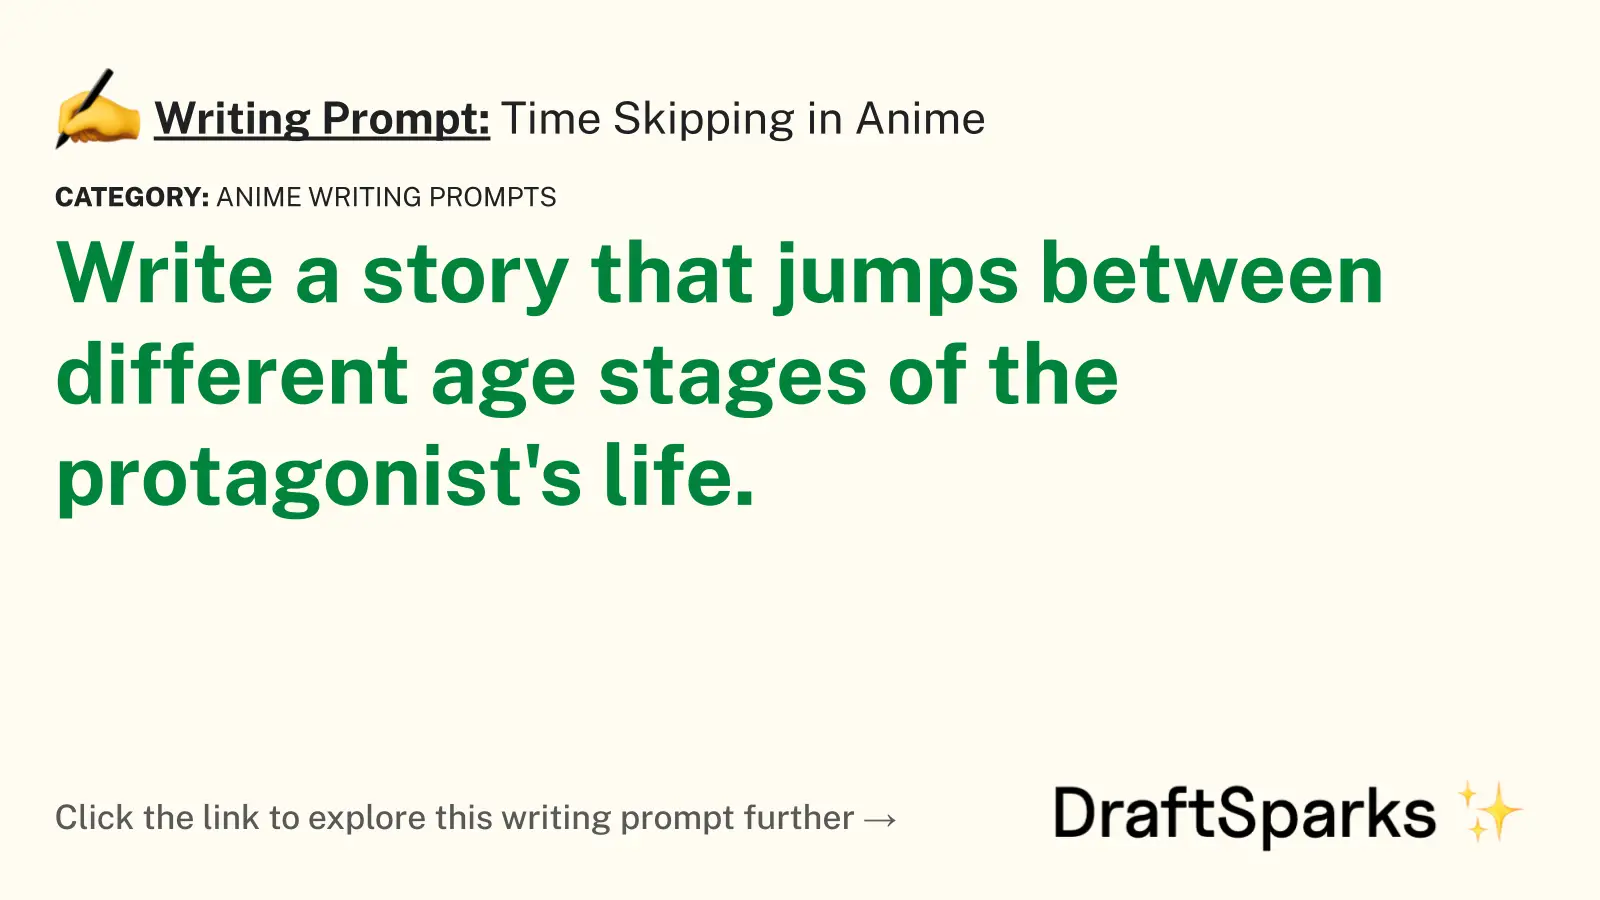 Time Skipping in Anime